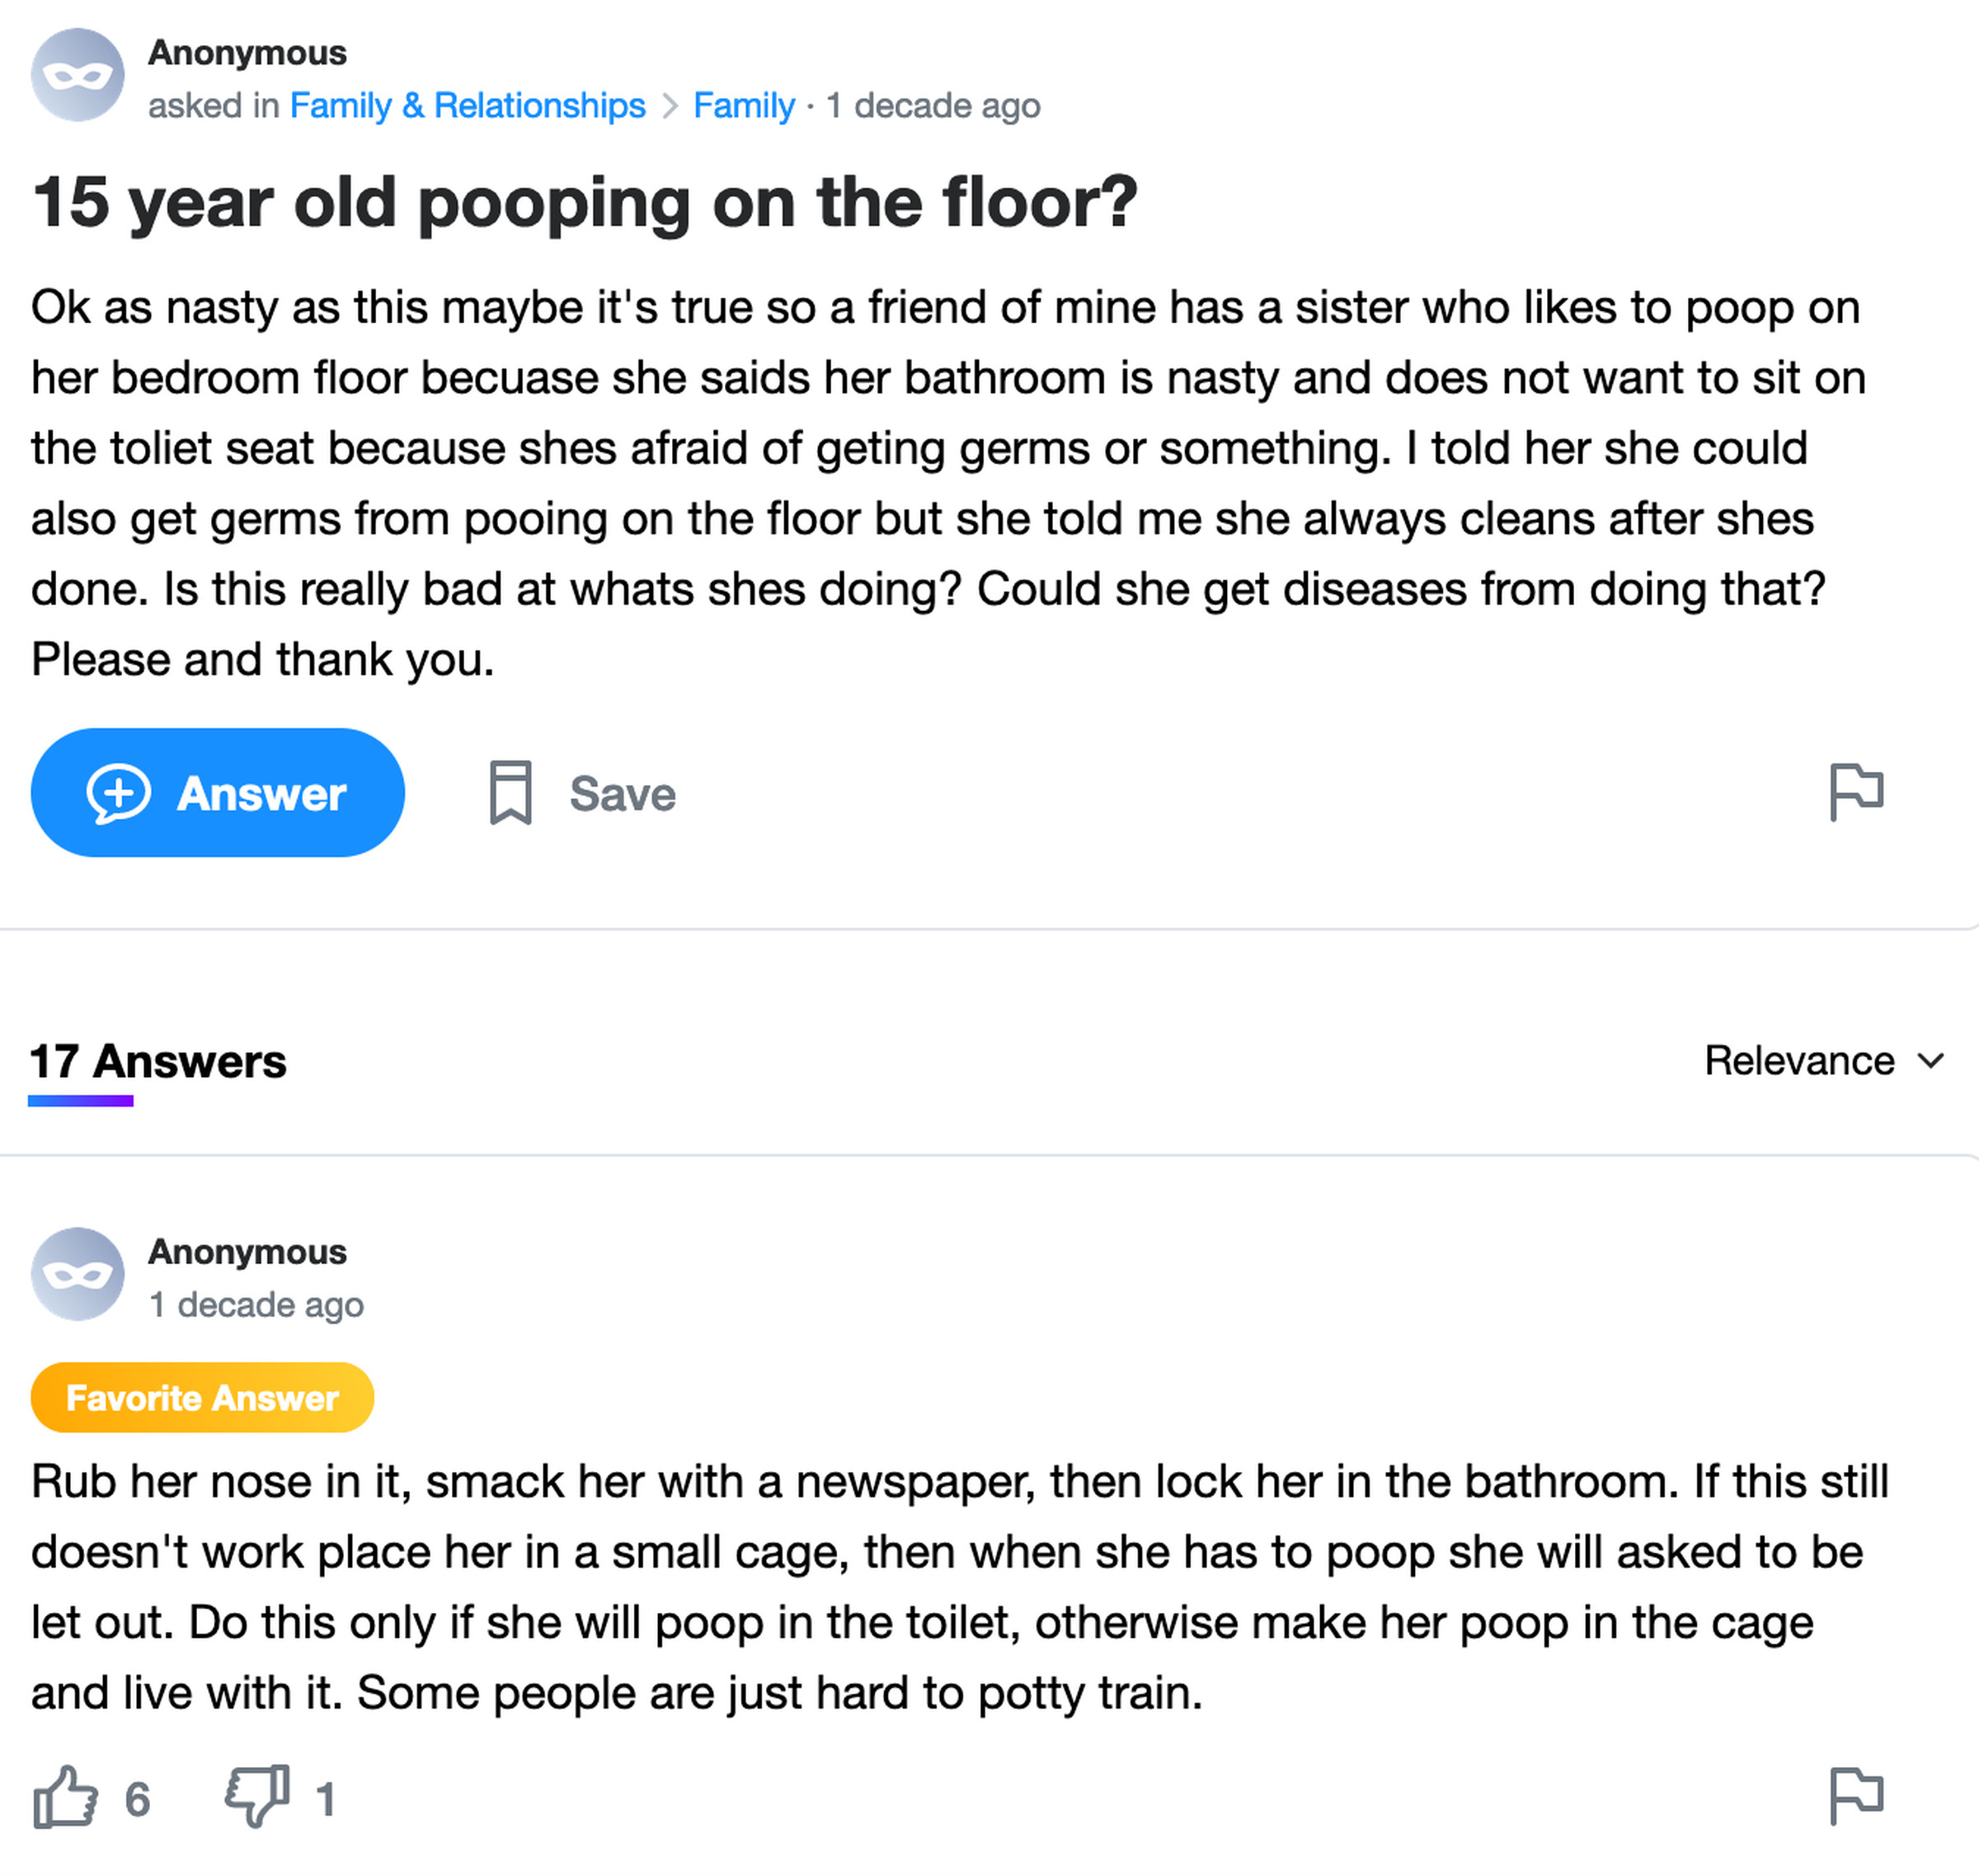 Yahoo Answers post: 15 year old pooping on the floor? Ok as nasty as this maybe it’s true so a friend of mine has a sister who likes to poop on her bedroom floor becuase she saids her bathroom is nasty and does not want to sit on the toliet seat because shes afraid of geting germs or something. I told her she could also get germs from pooing on the floor but she told me she always cleans after shes done. Is this really bad at whats shes doing? Could she get diseases from doing that?